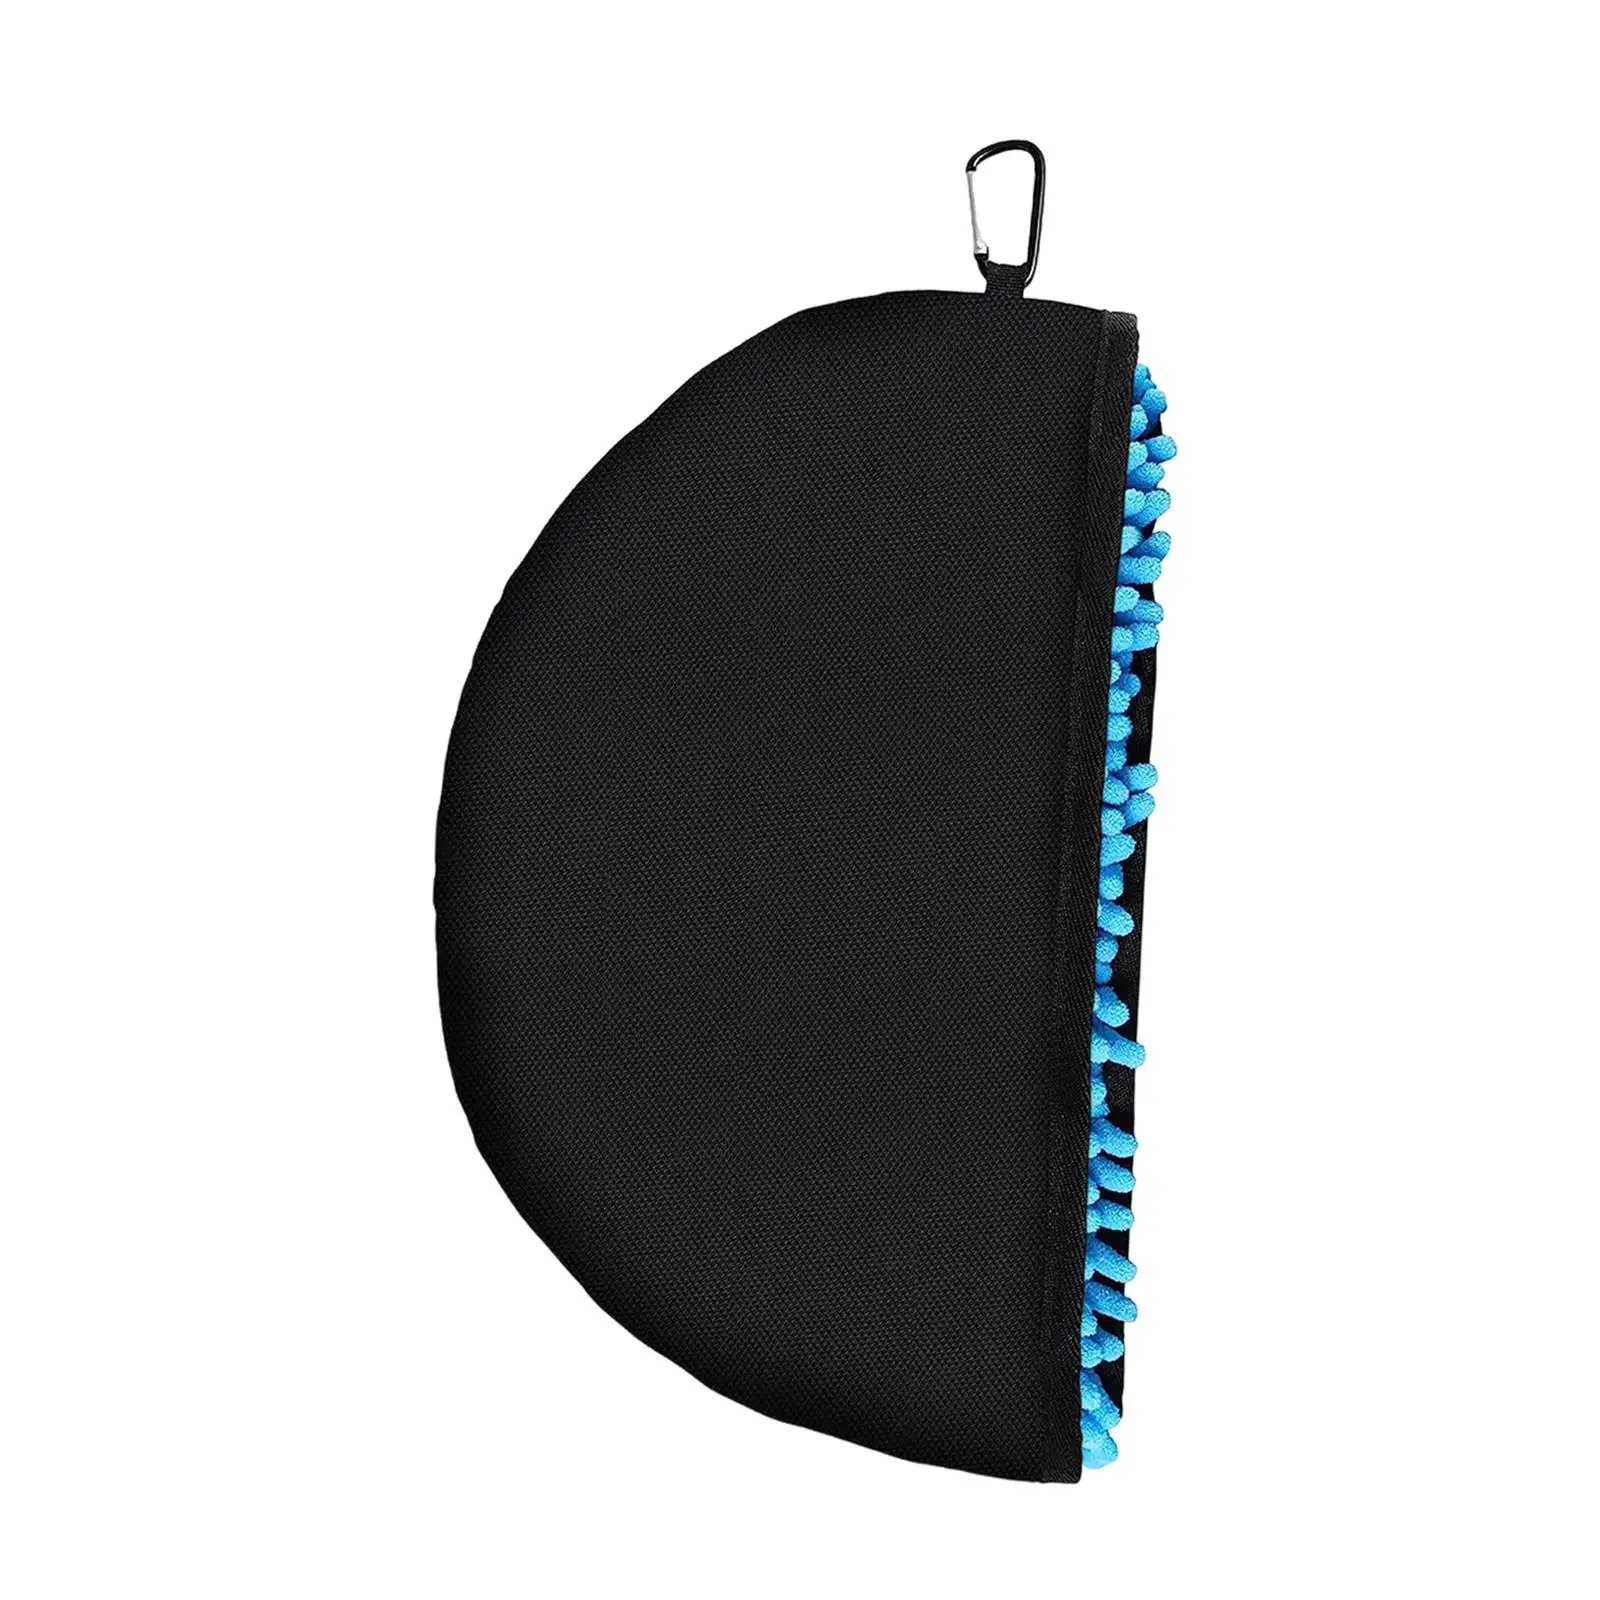 Flying Disc Cleaning Tool Target Accessories Tote Water Resistant Durable Indoor Outdoor Cleaning Towel Case for Travel Sports